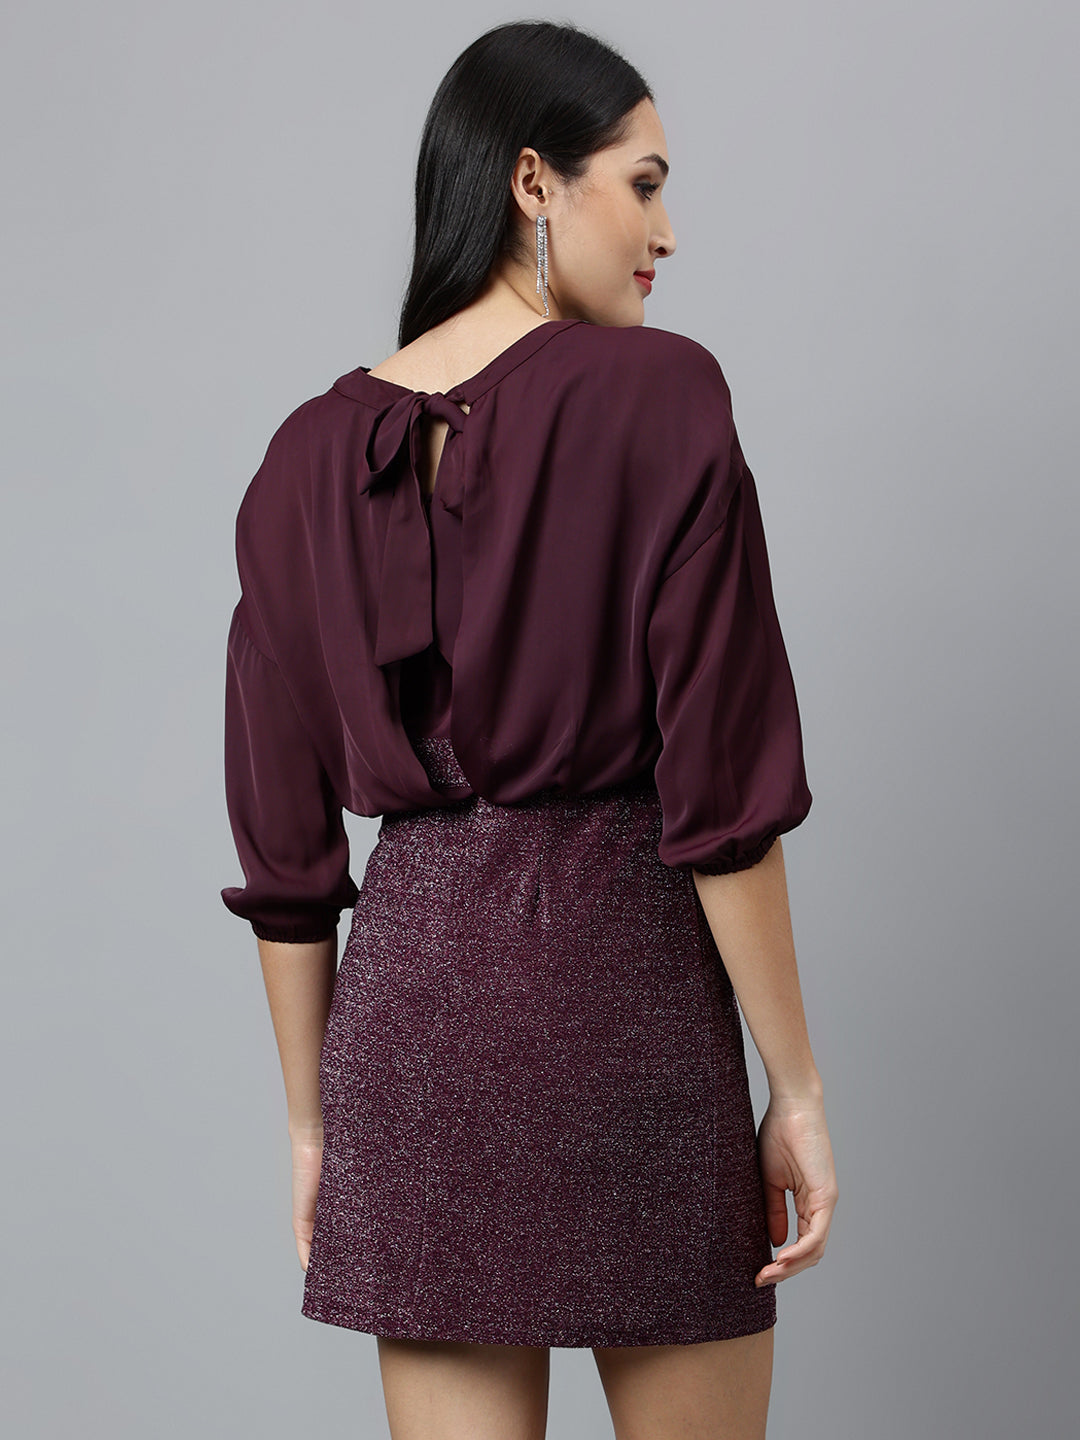 Purple Solid 3/4 Sleeve Party Dress